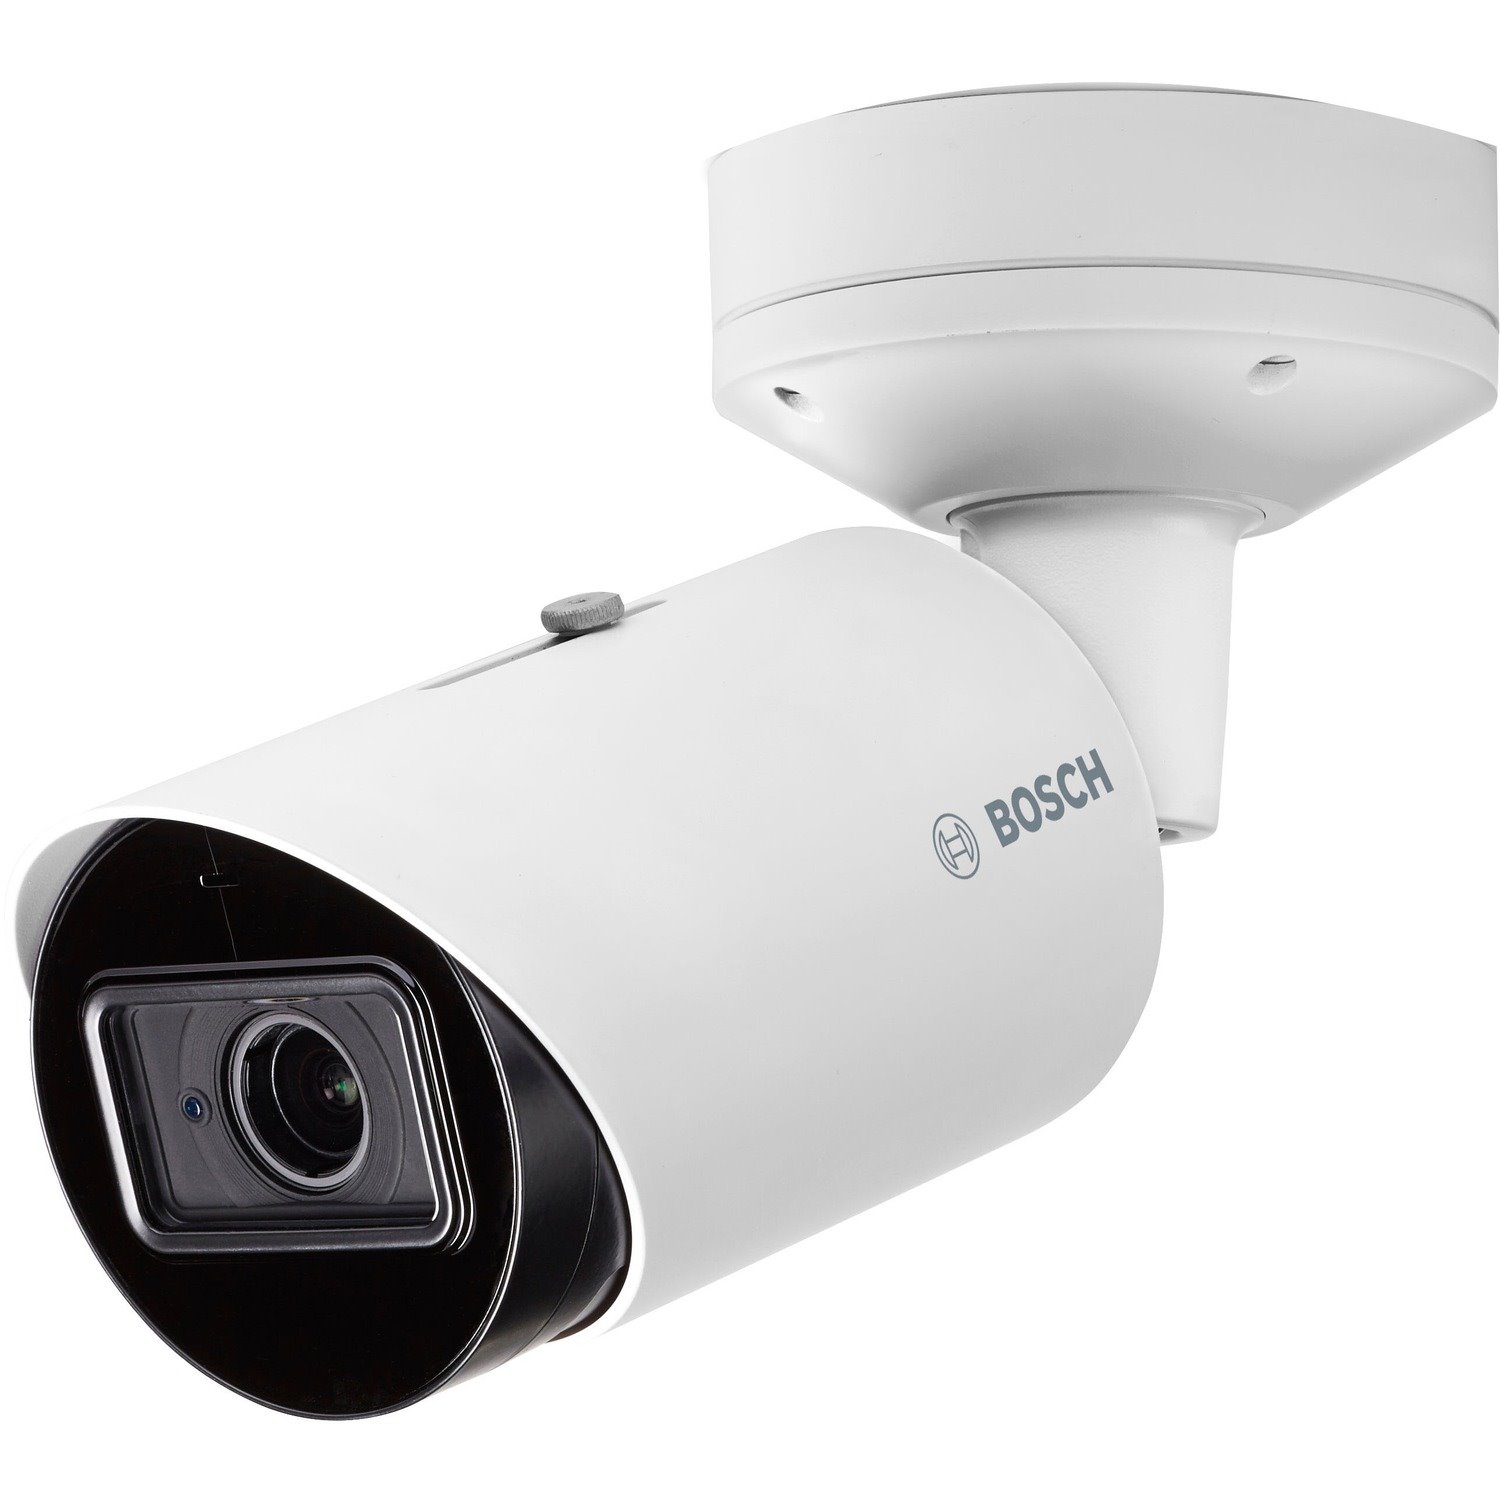 Bosch DINION IP NBE-3502-AL 2 Megapixel Outdoor Full HD Network Camera - Colour - Bullet - White - TAA Compliant